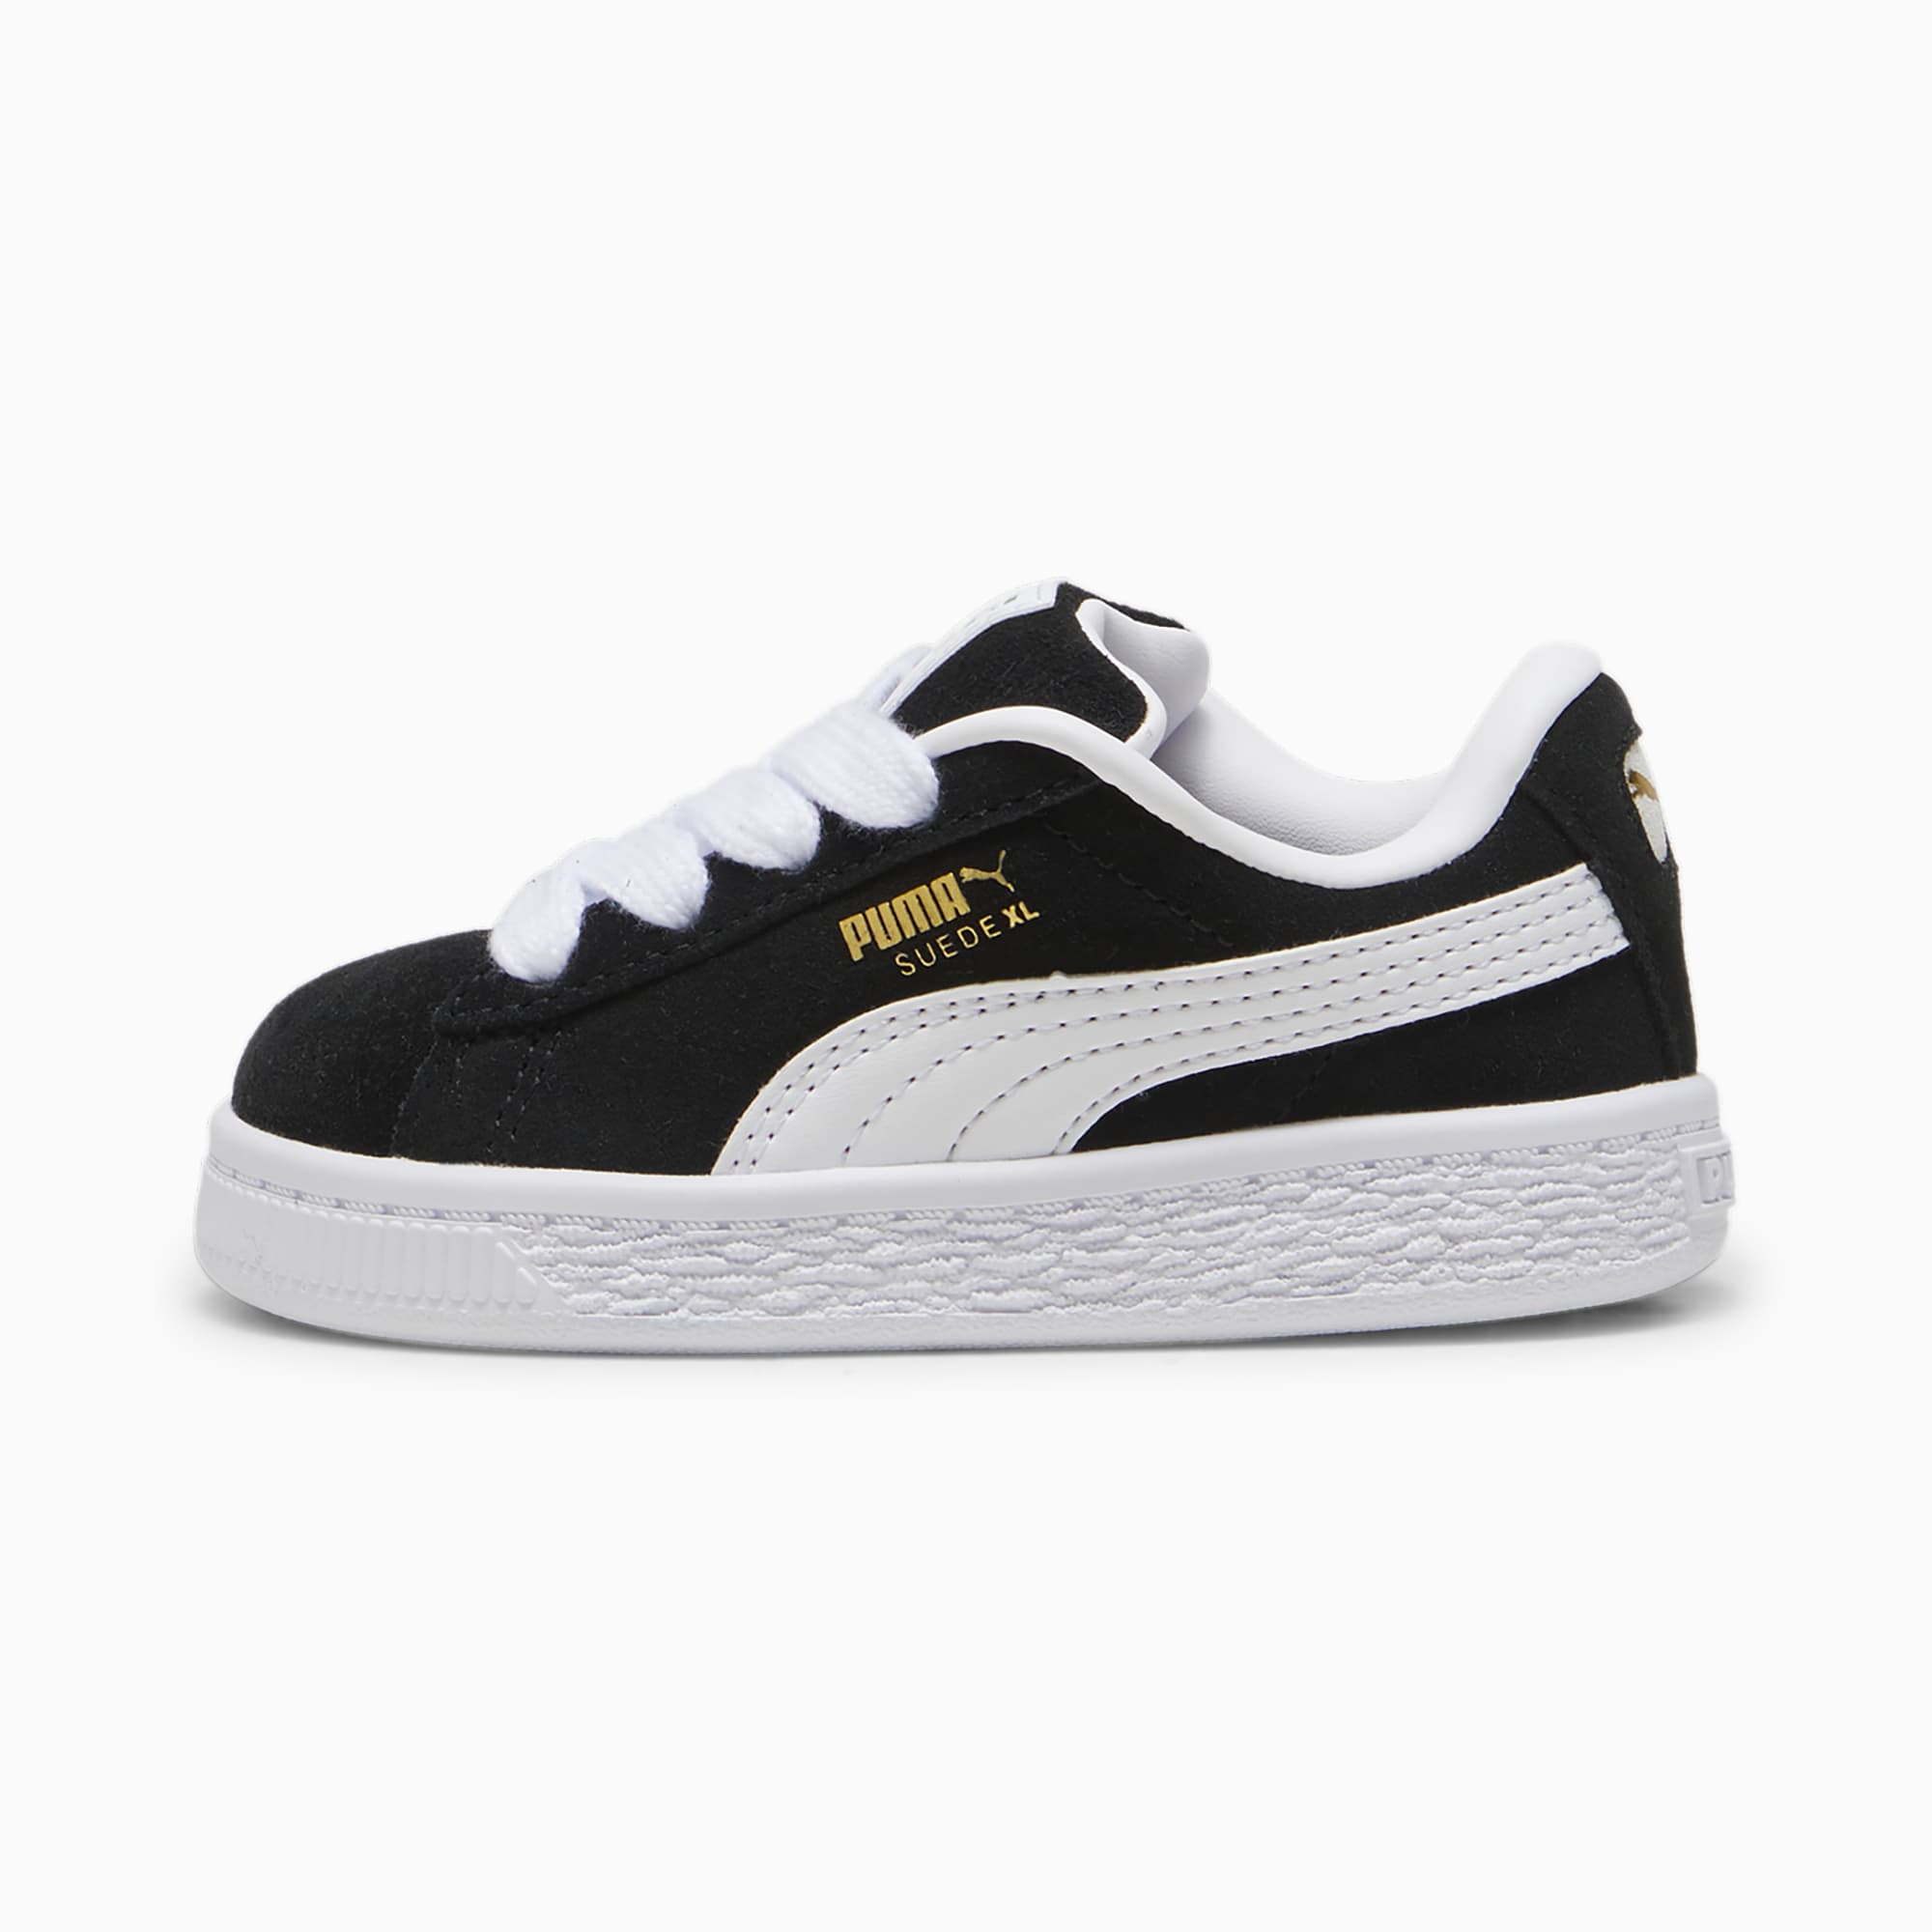 Suede XL Toddlers' Sneakers